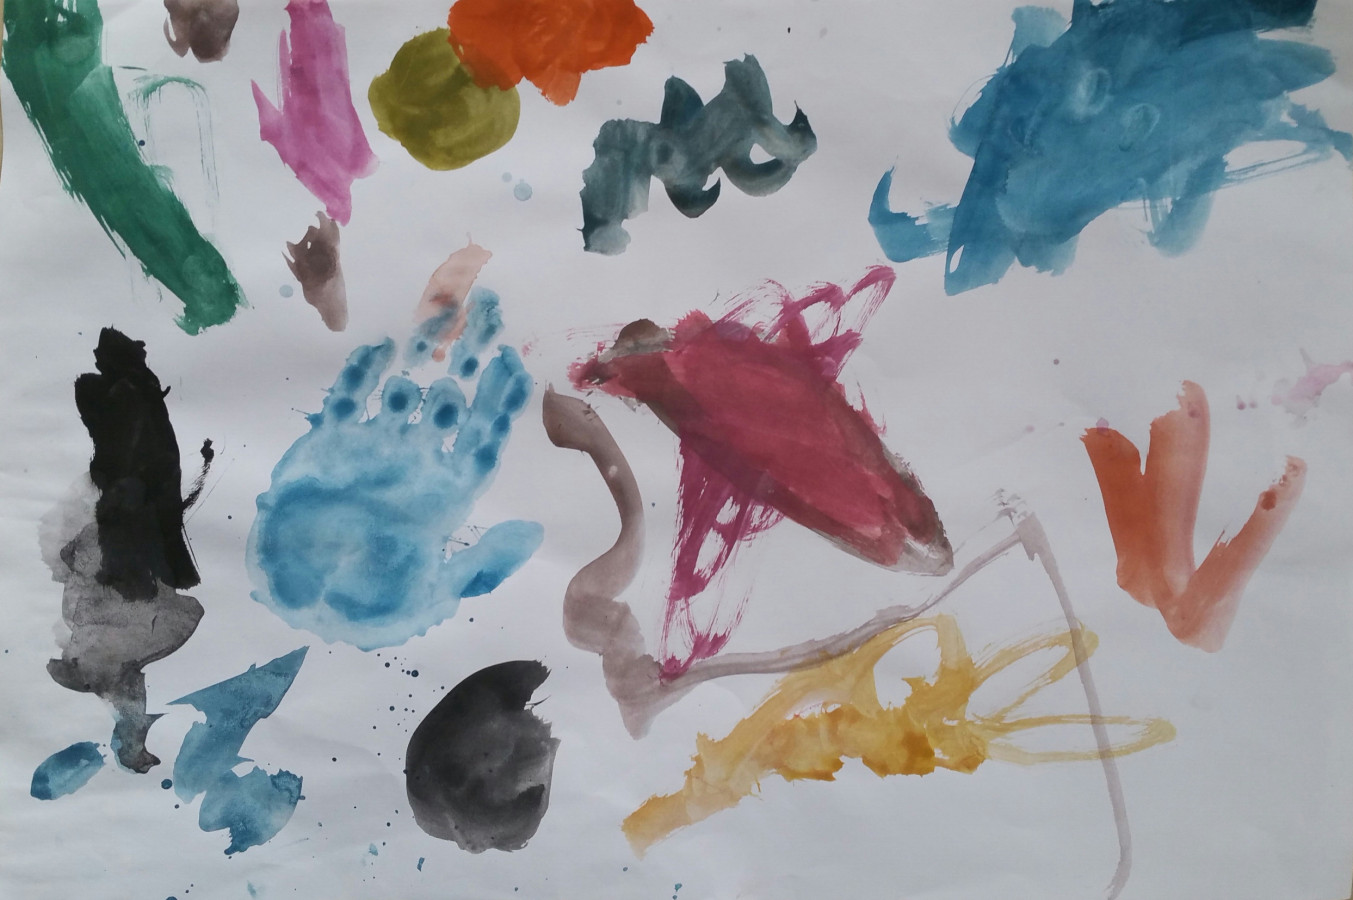 'Mexico Rabbit Storm' by Olivia (4) from Galway